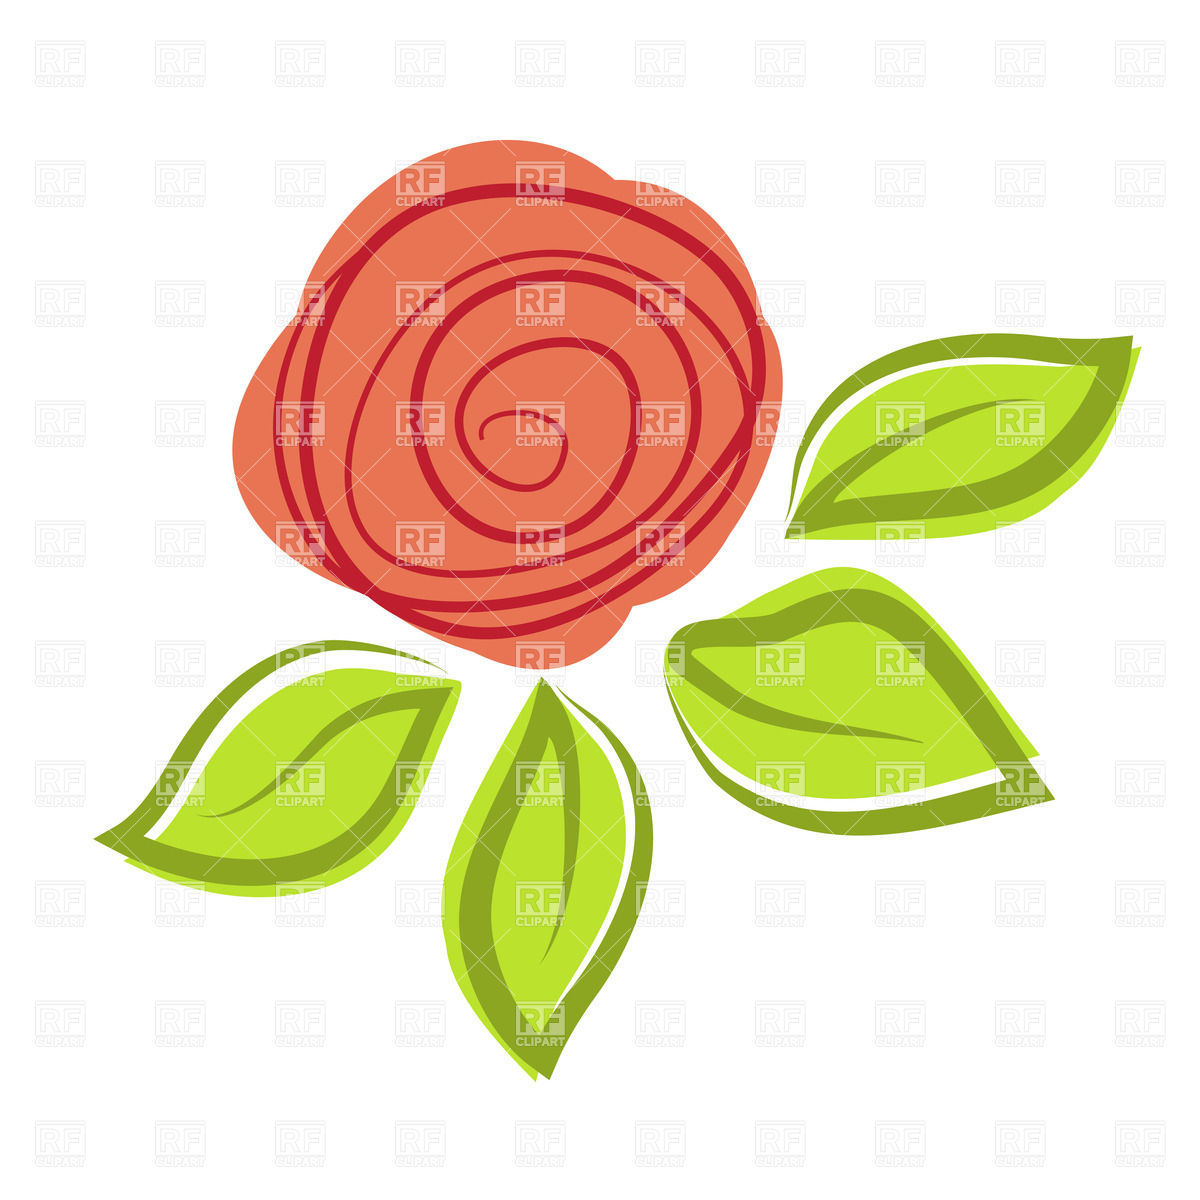 Stylized Simple Rose Flower   Bud With Leaves Download Royalty Free    